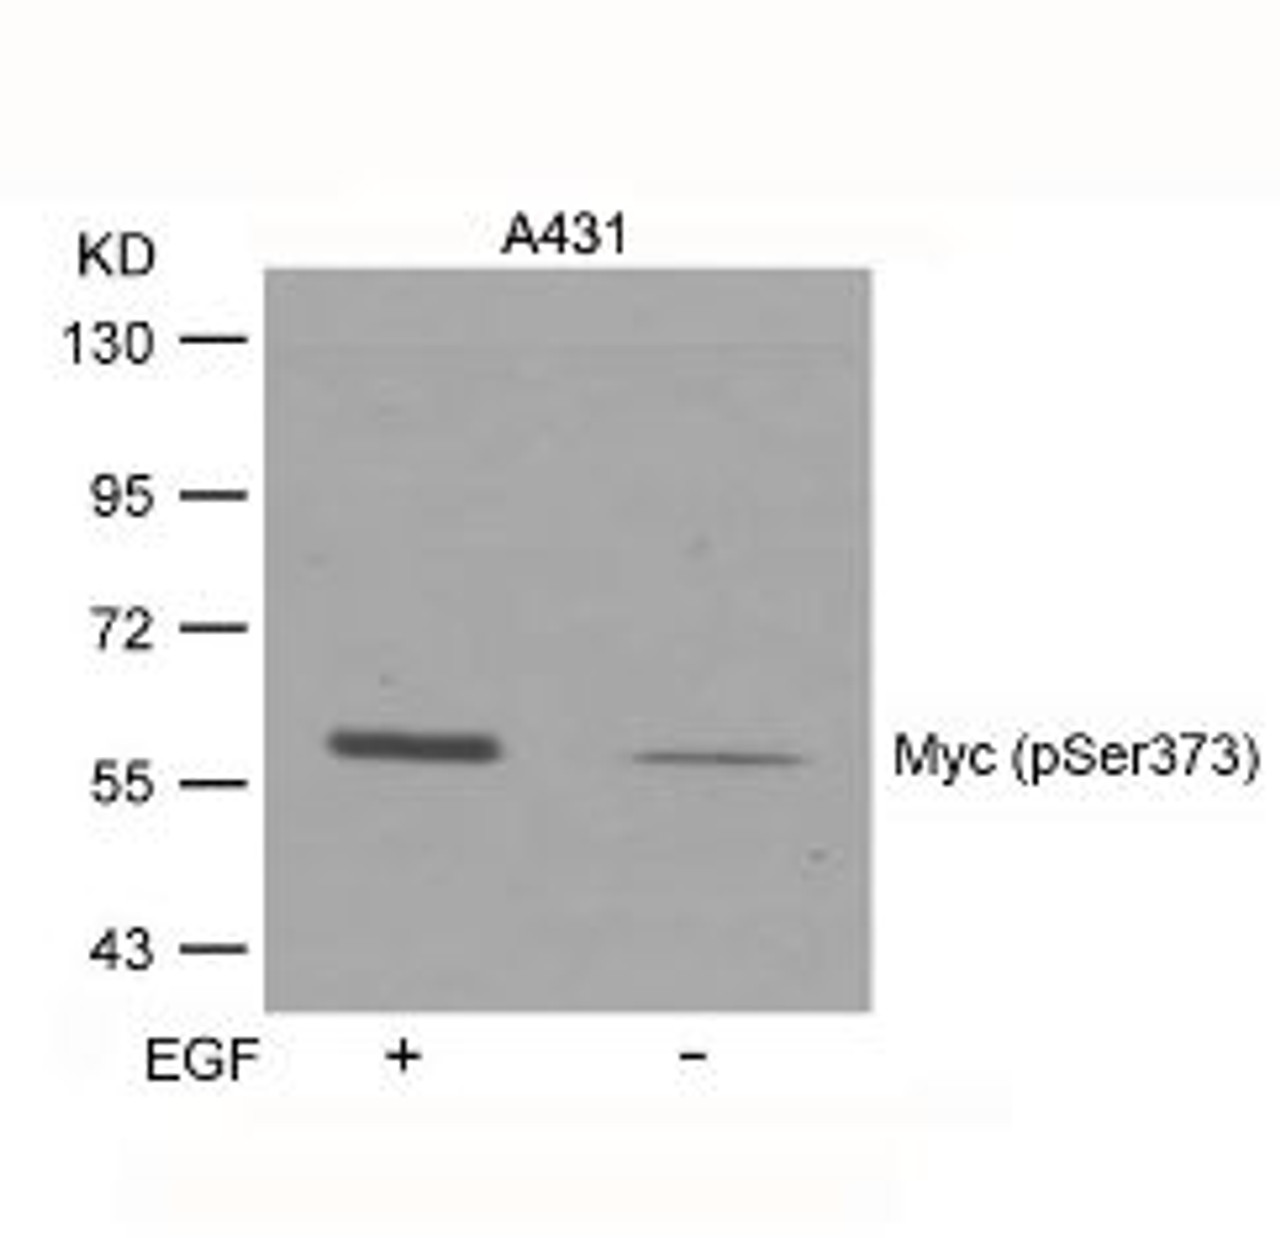 Western blot analysis of lysed extracts from A431 cells untreated or treated with EGF using Myc (Phospho-Ser373) .